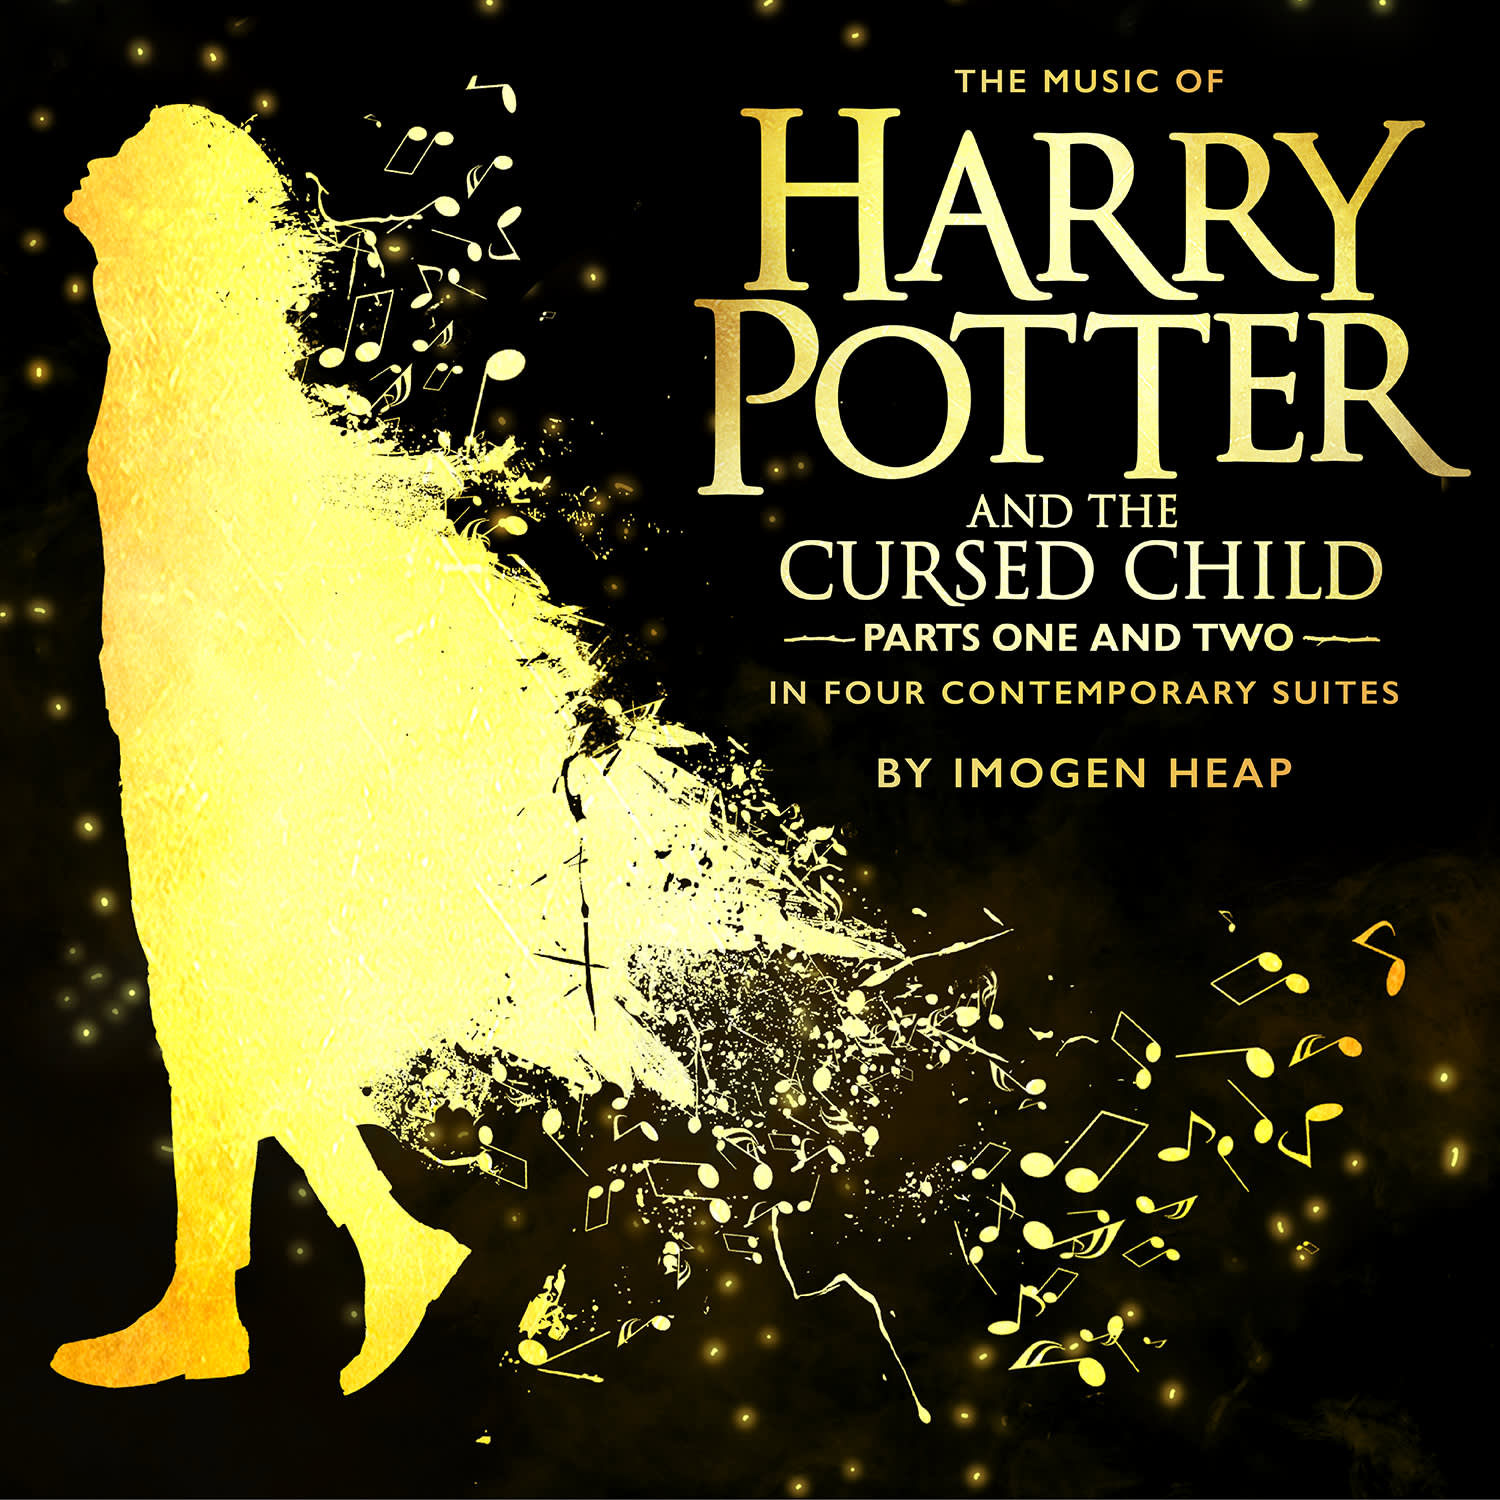 Harry Potter and the Cursed Child music album